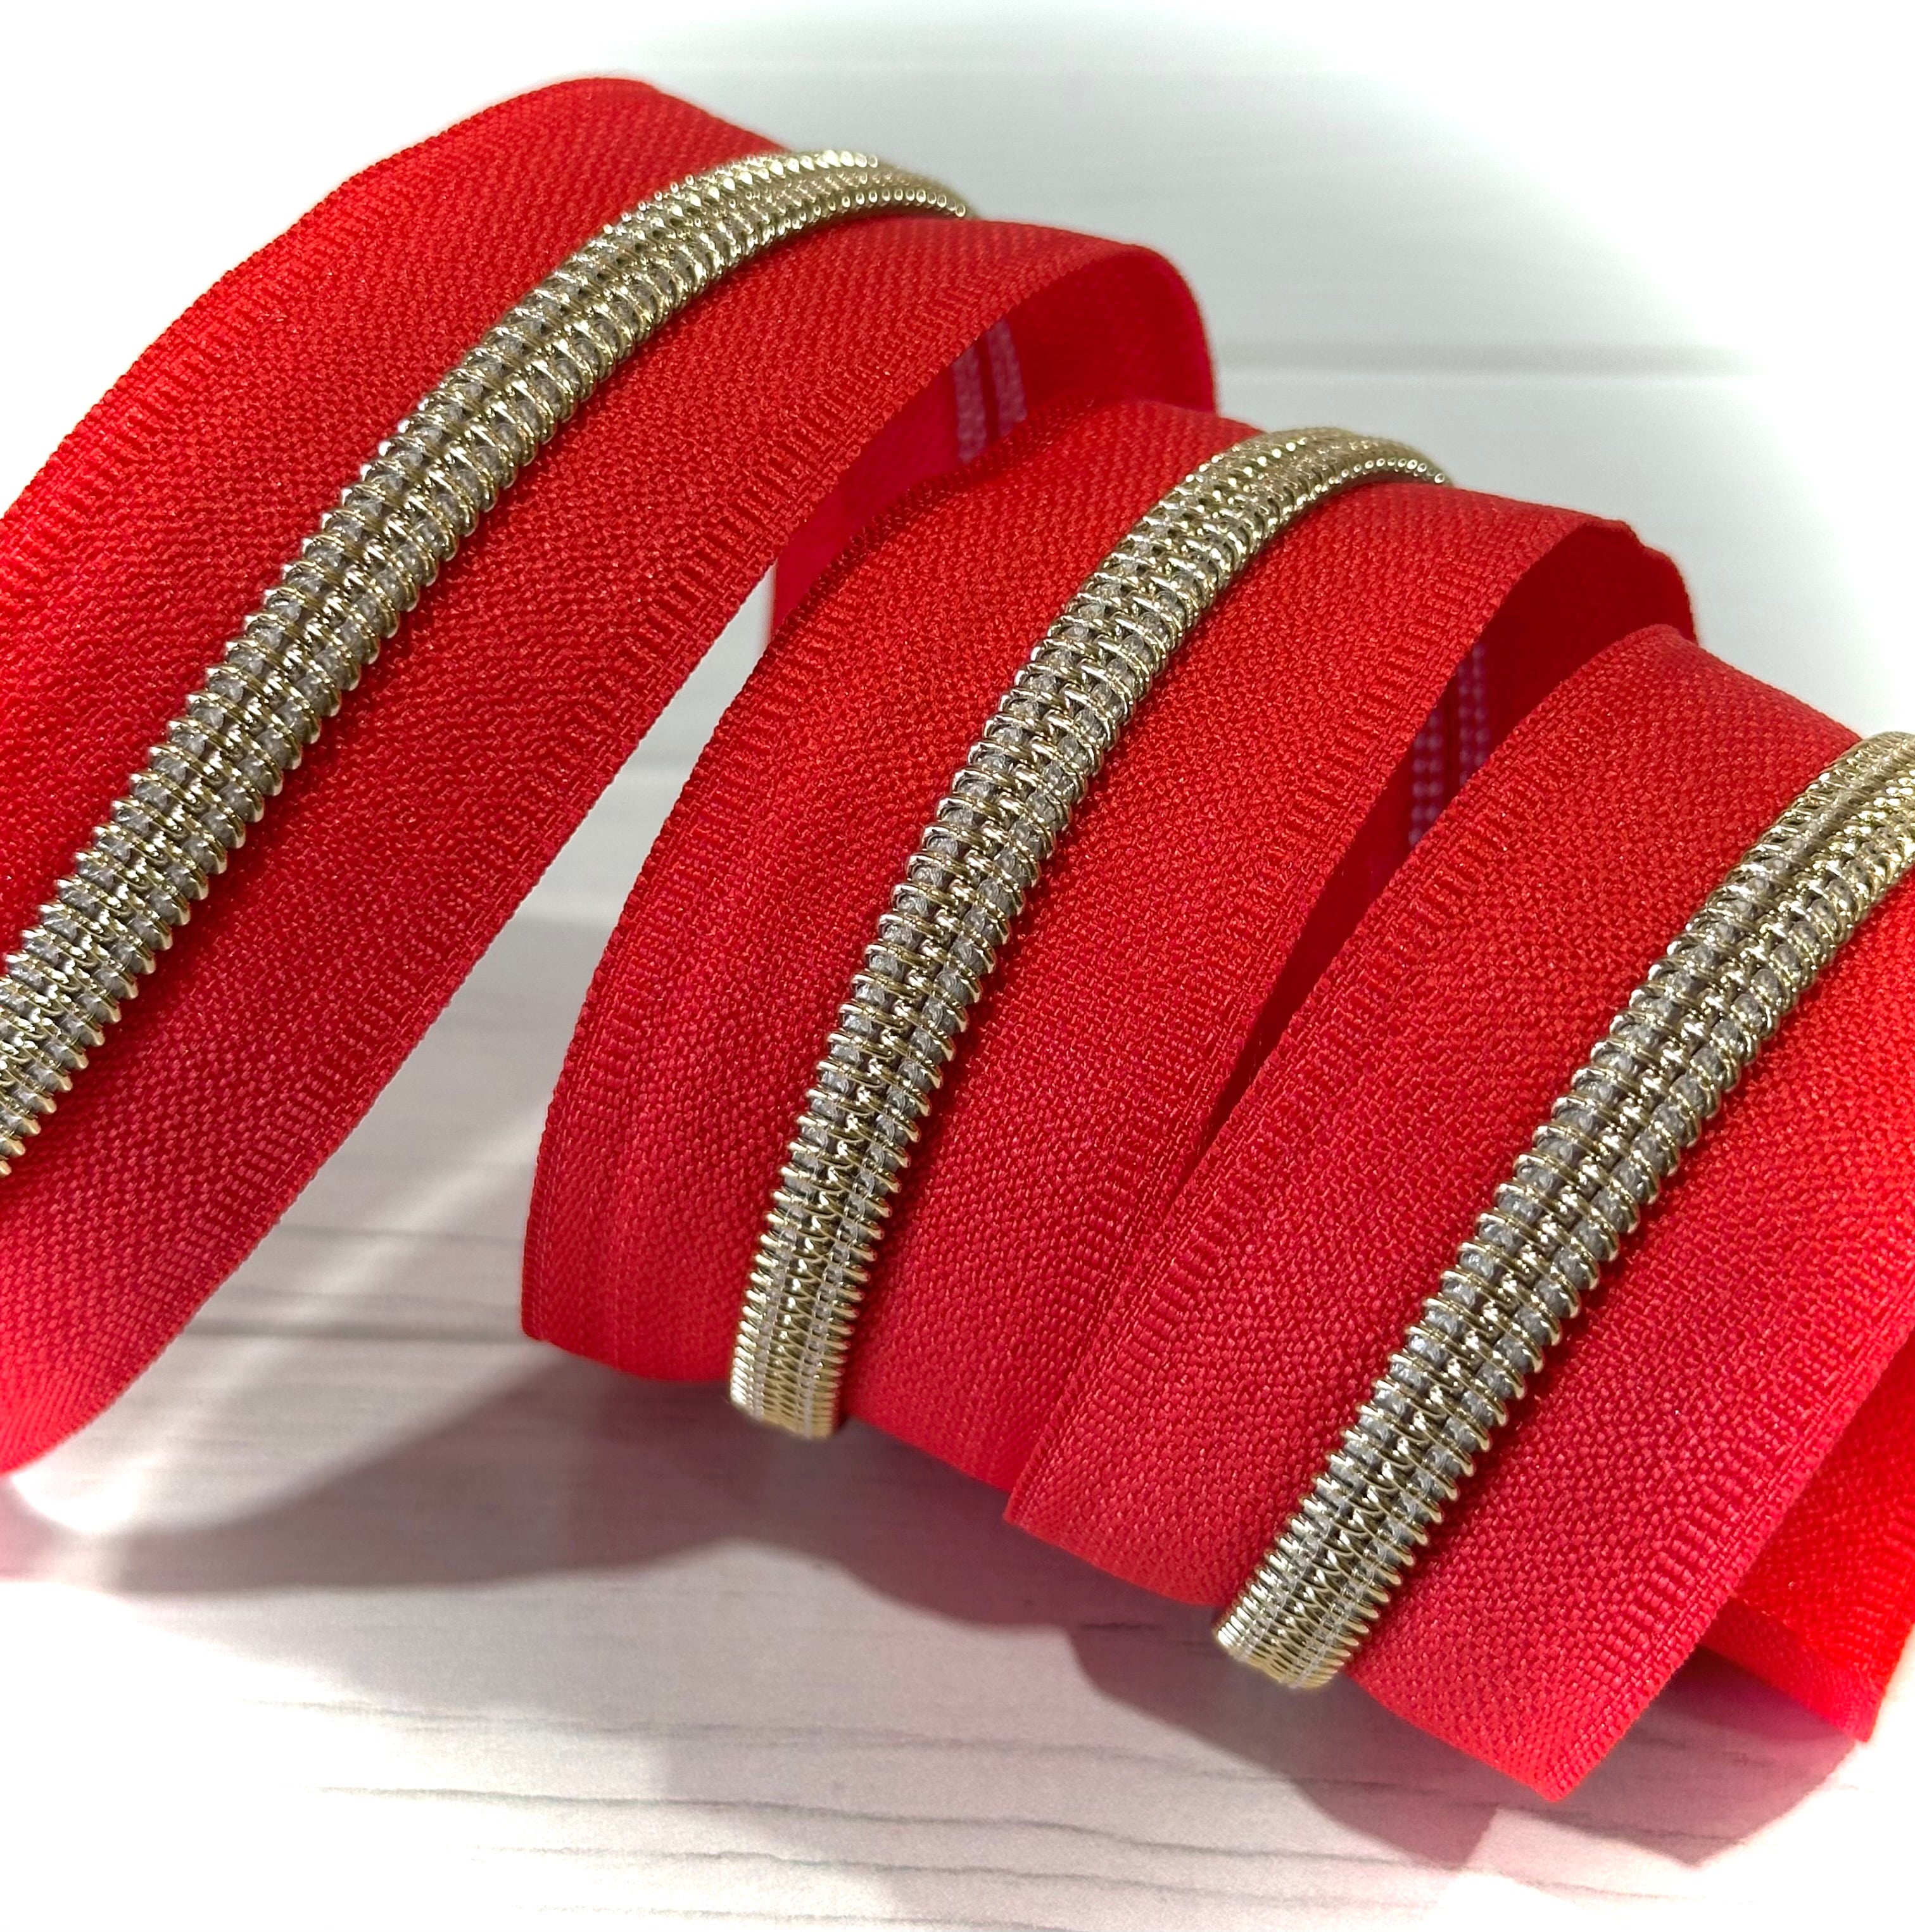 Red zipper tape with Gold teeth